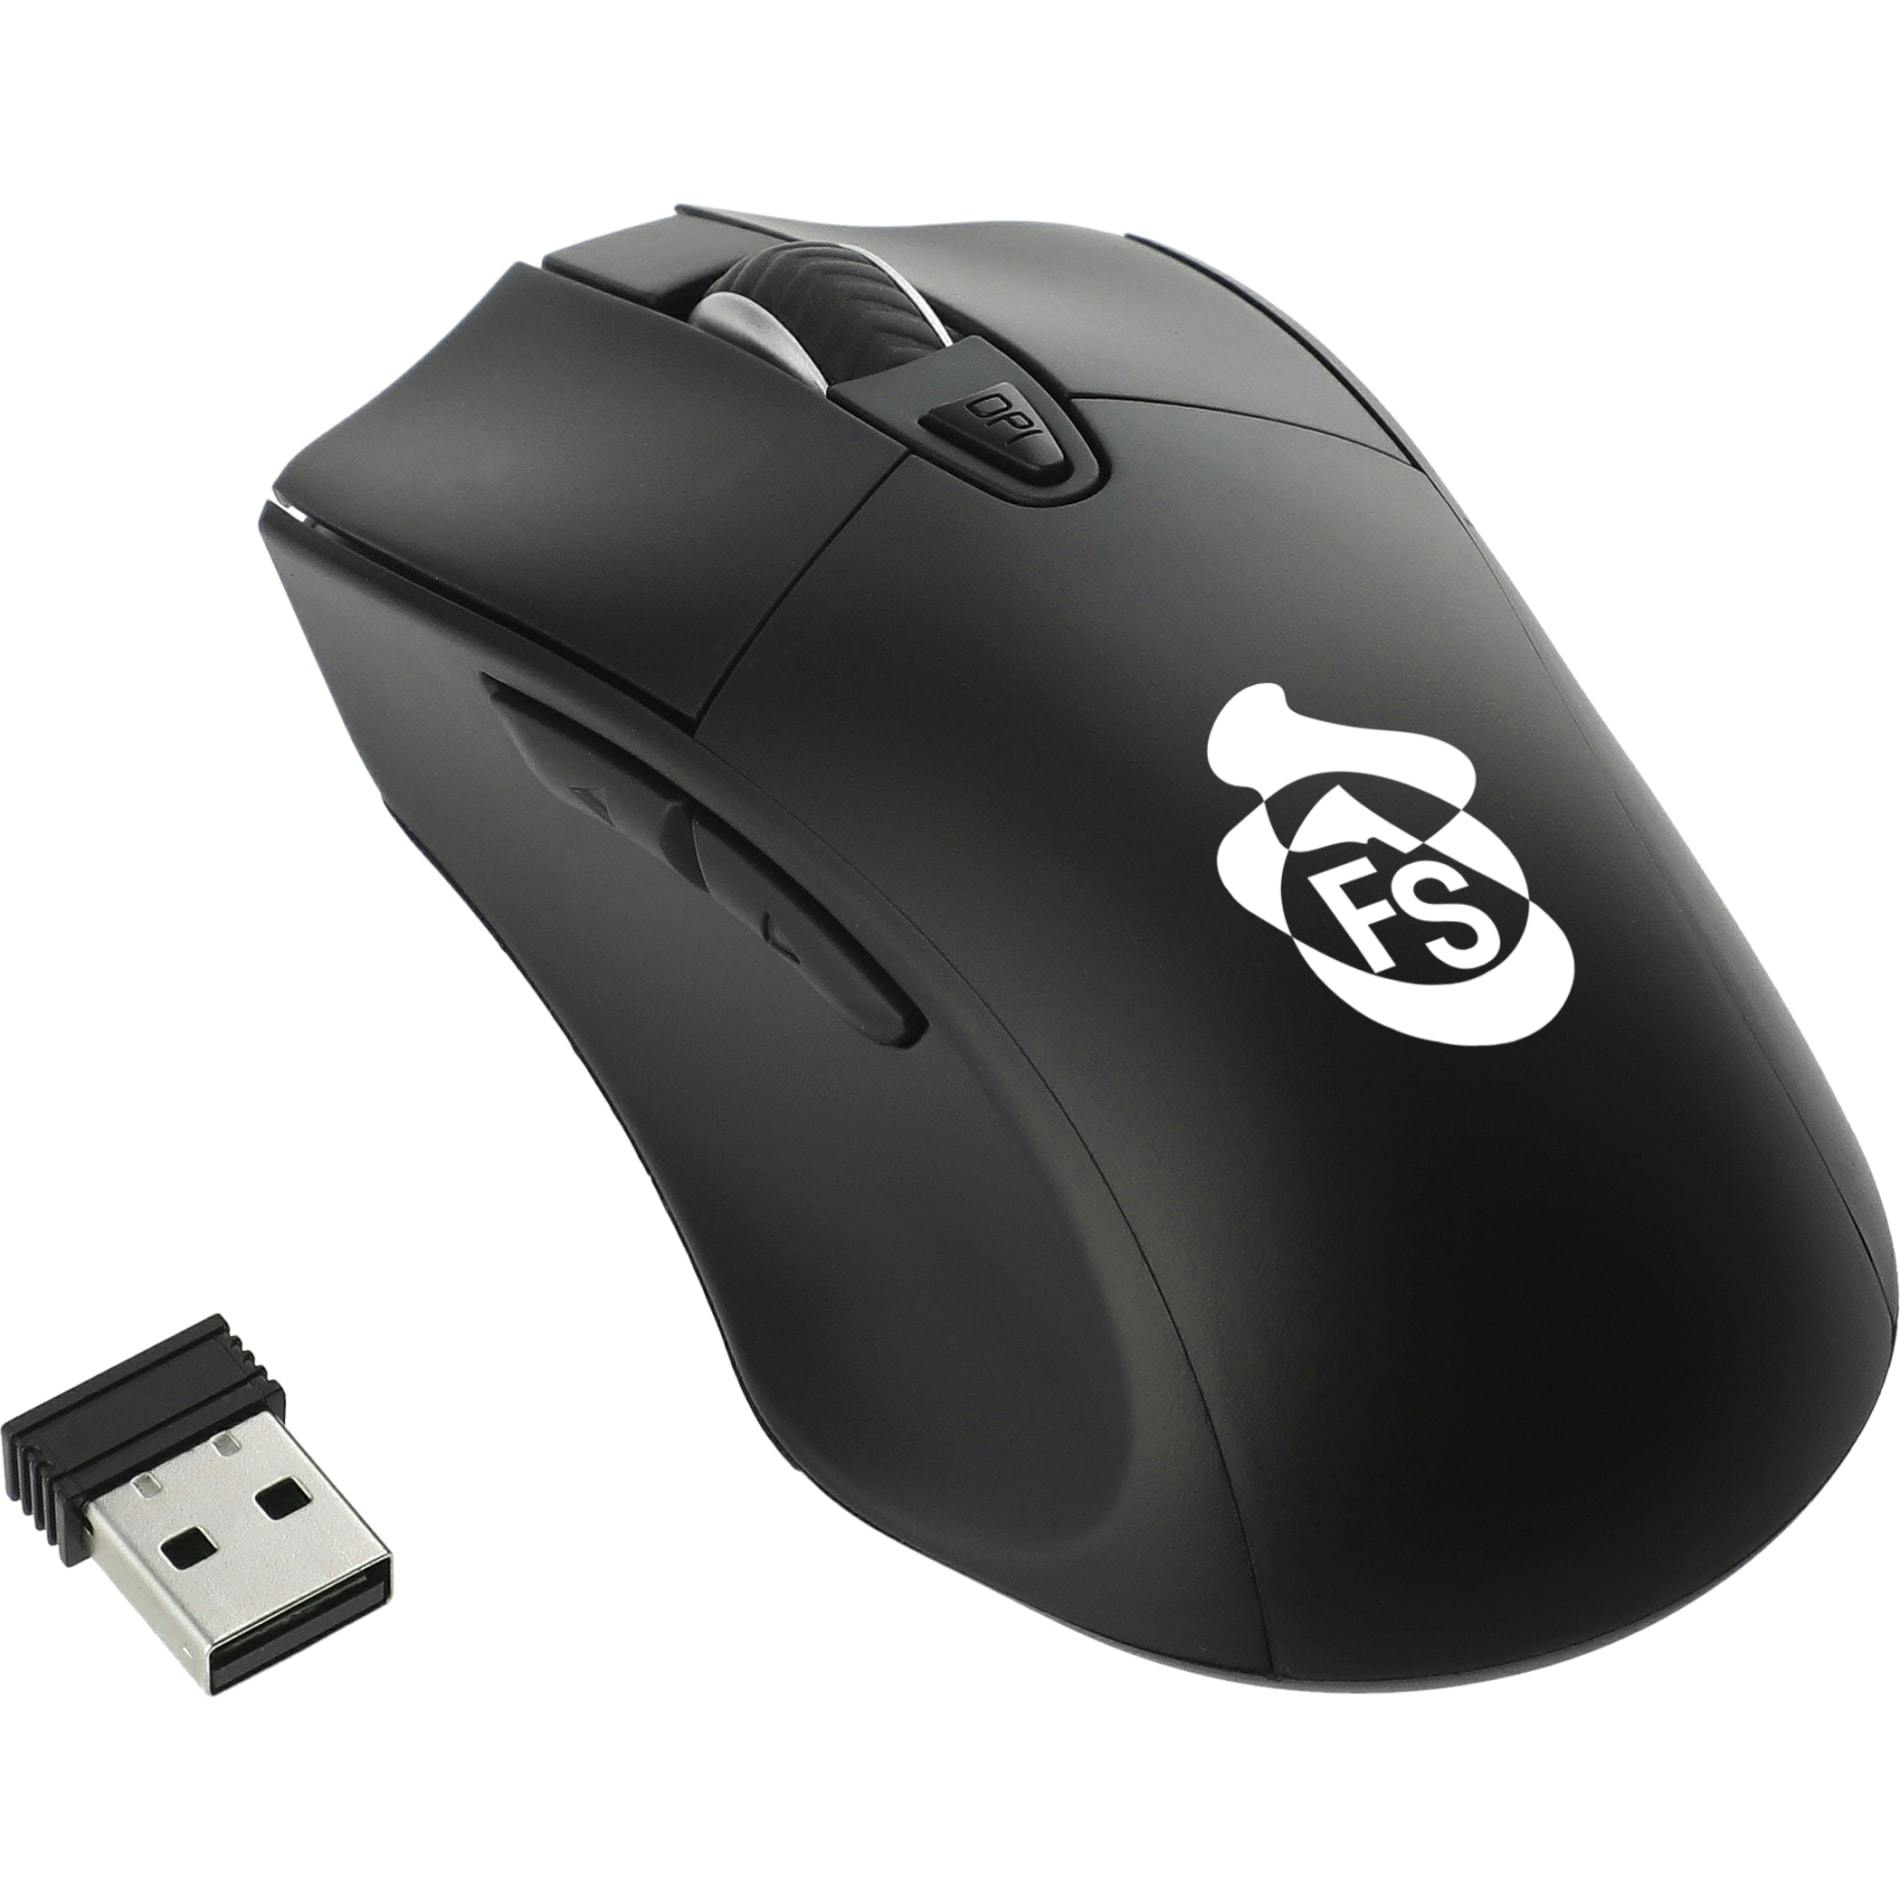 Wizard Wireless Mouse with Coating - additional Image 2